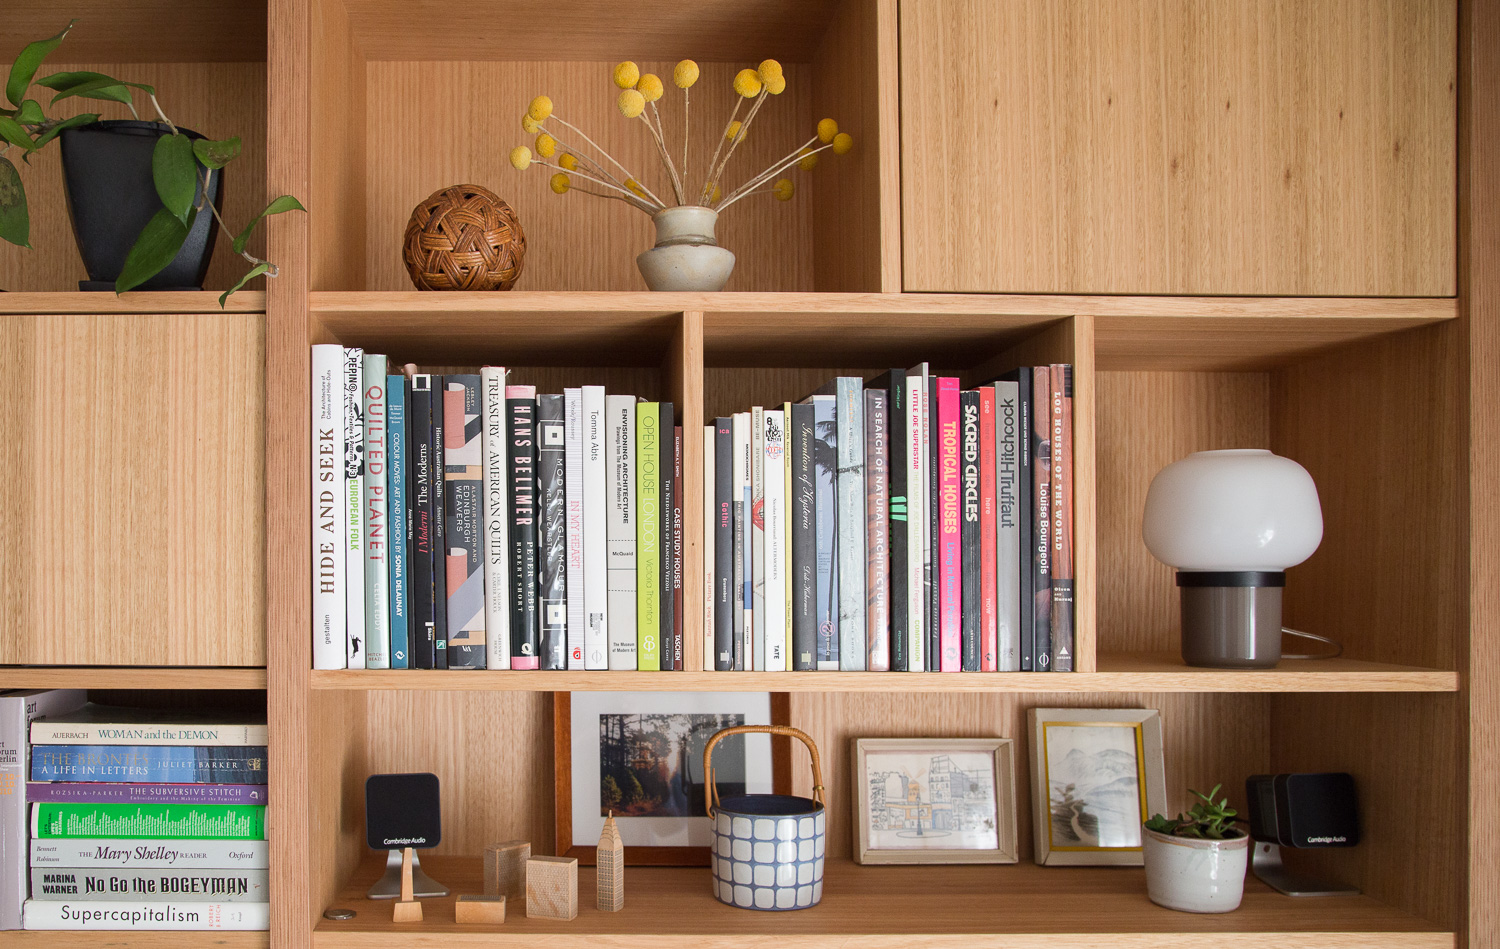 Custom timber joinery shelving unit clifton hill | handcrafted sustainable furniture design melbourne and geelong |